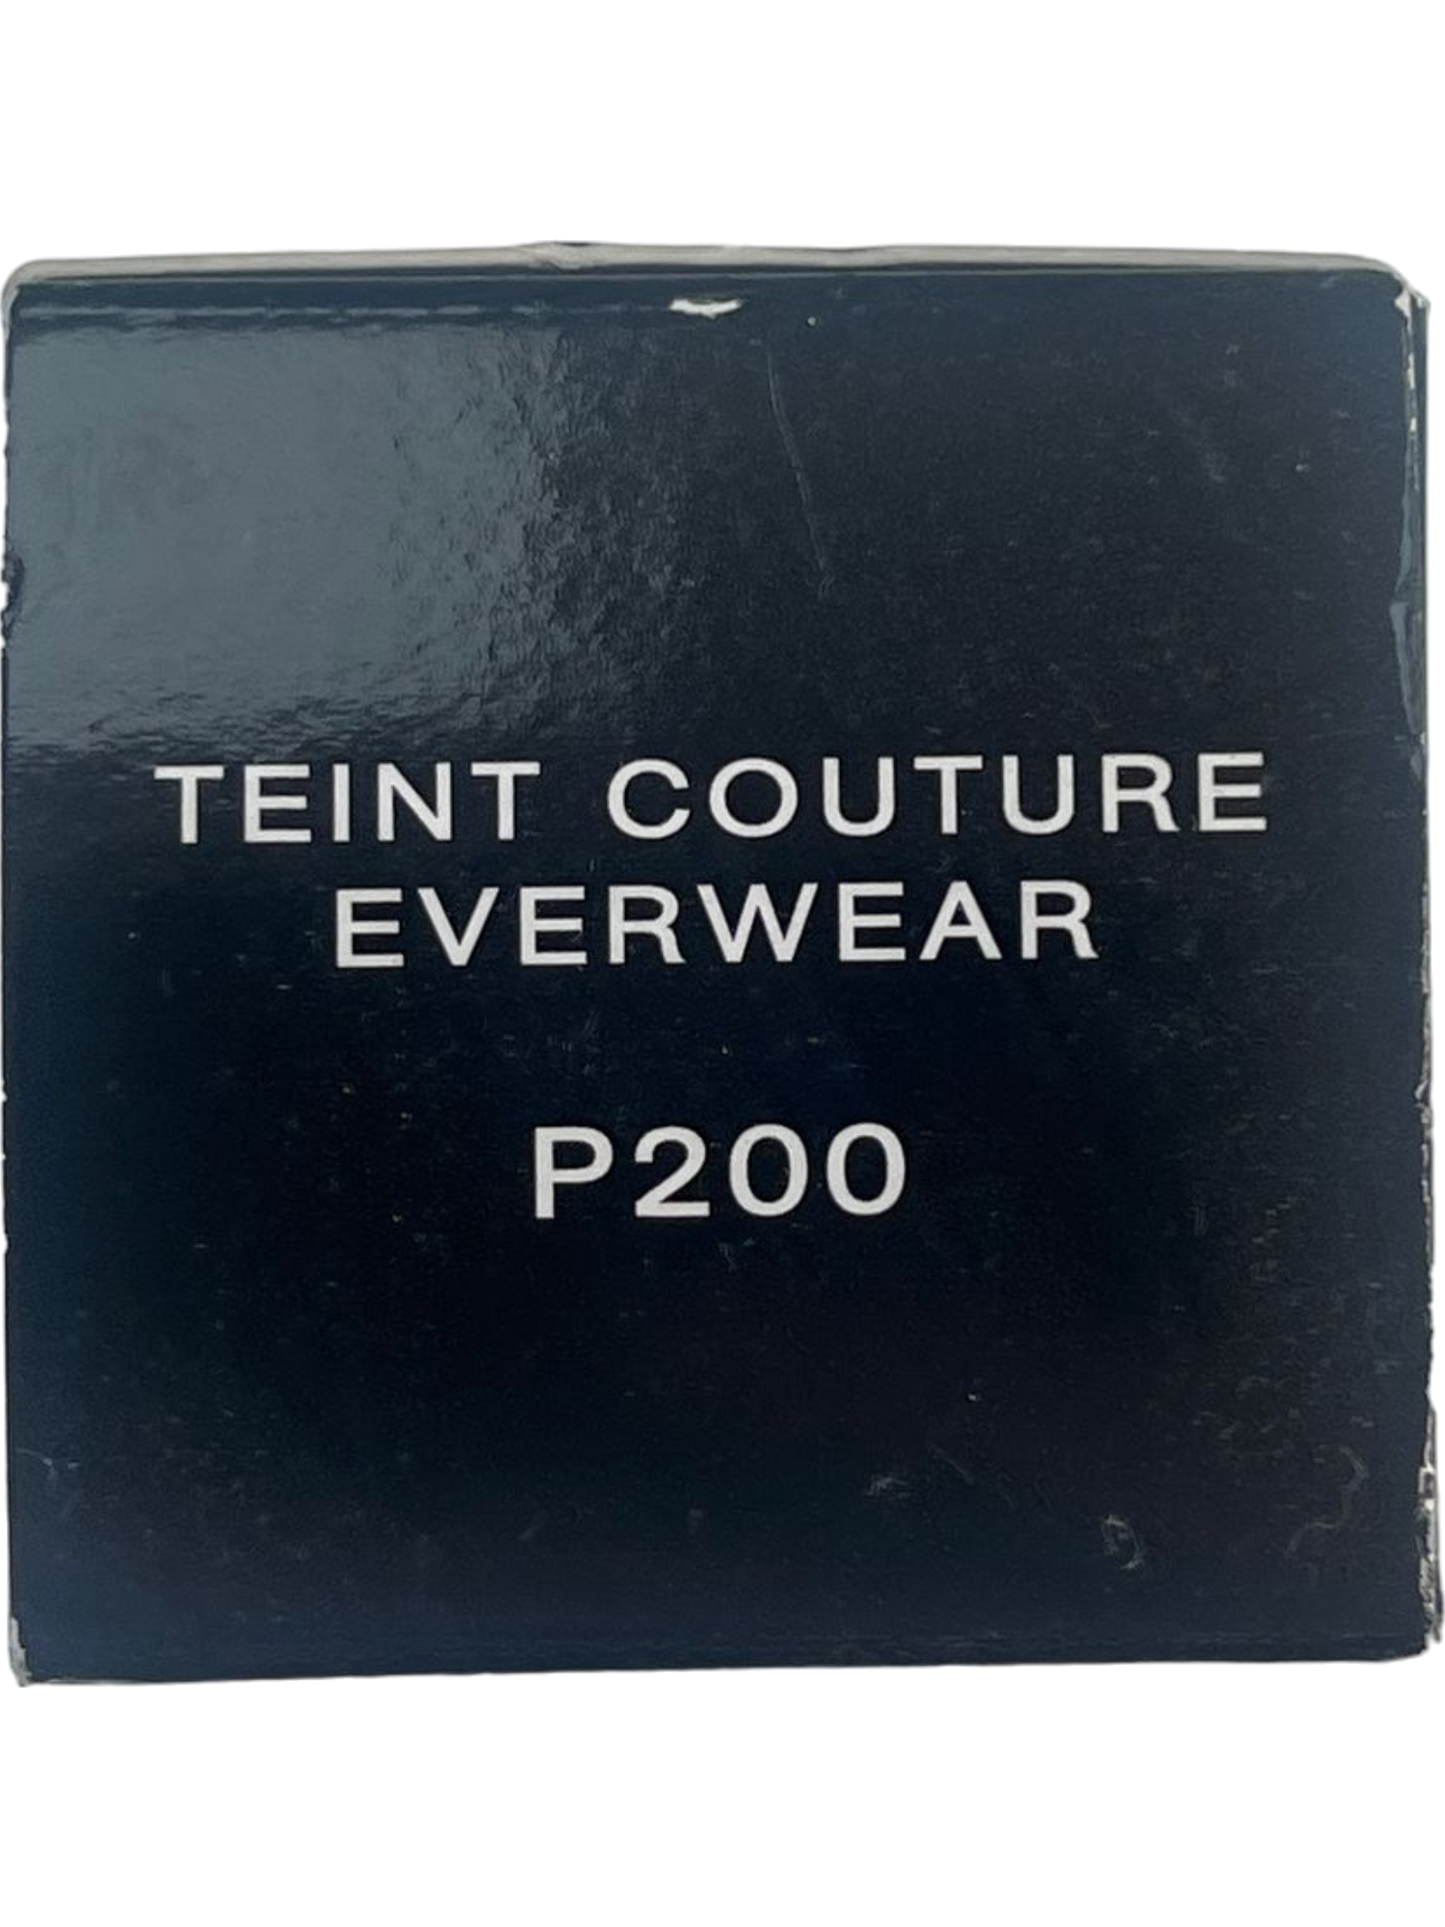 Givenchy P200 Teint Couture Everwear 24HR SPF20 Foundation 30ml